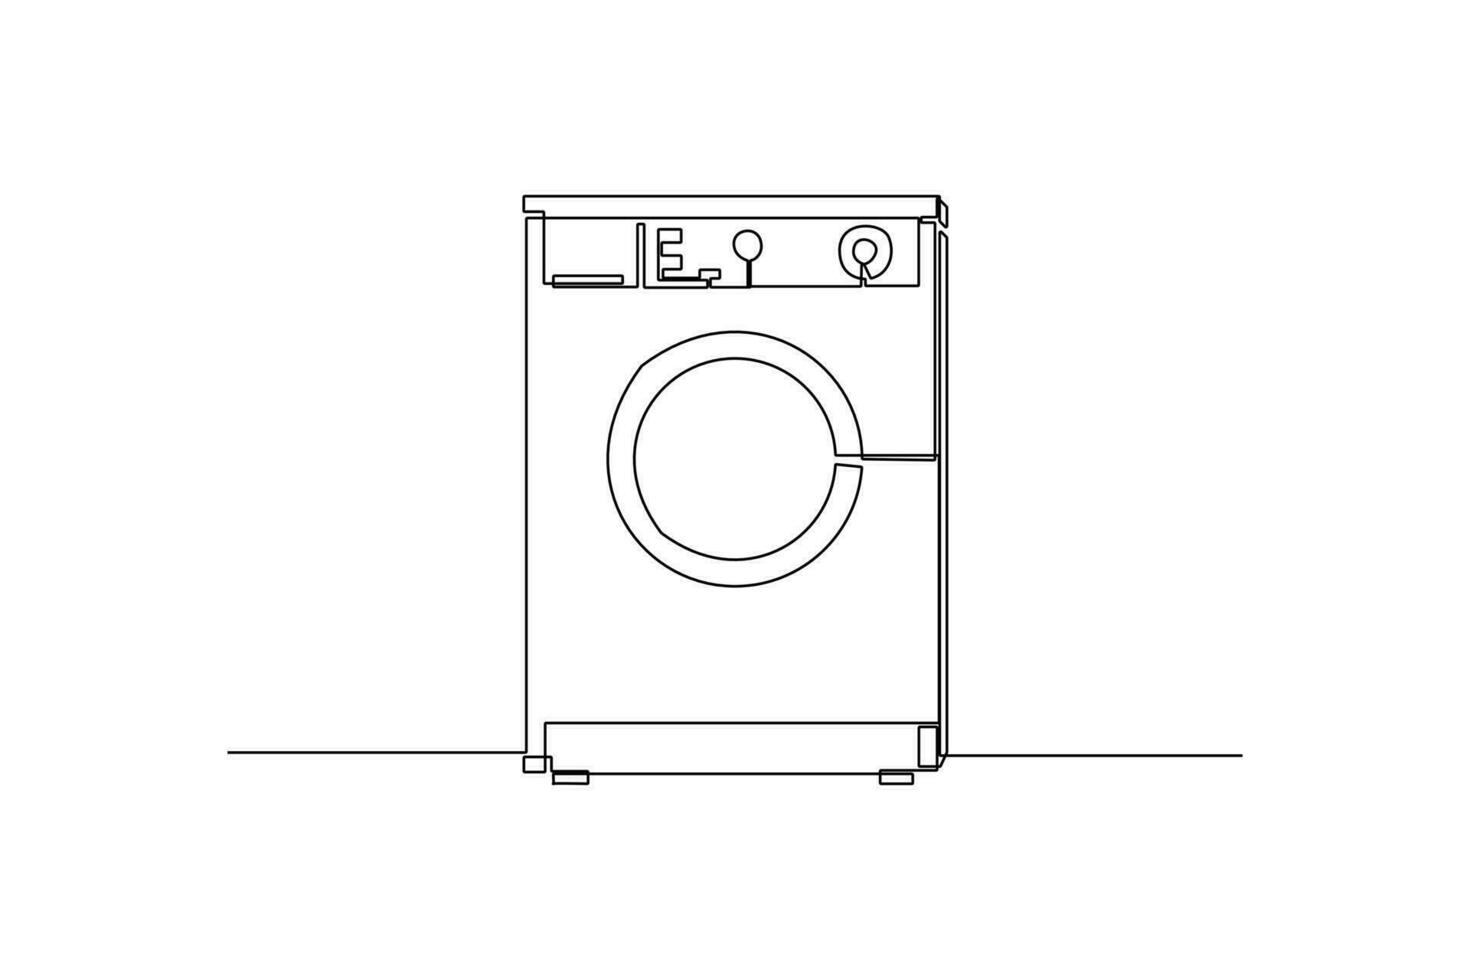 Continuous one line drawing washing machine. Home appliances concept. Single line draw design vector graphic illustration.